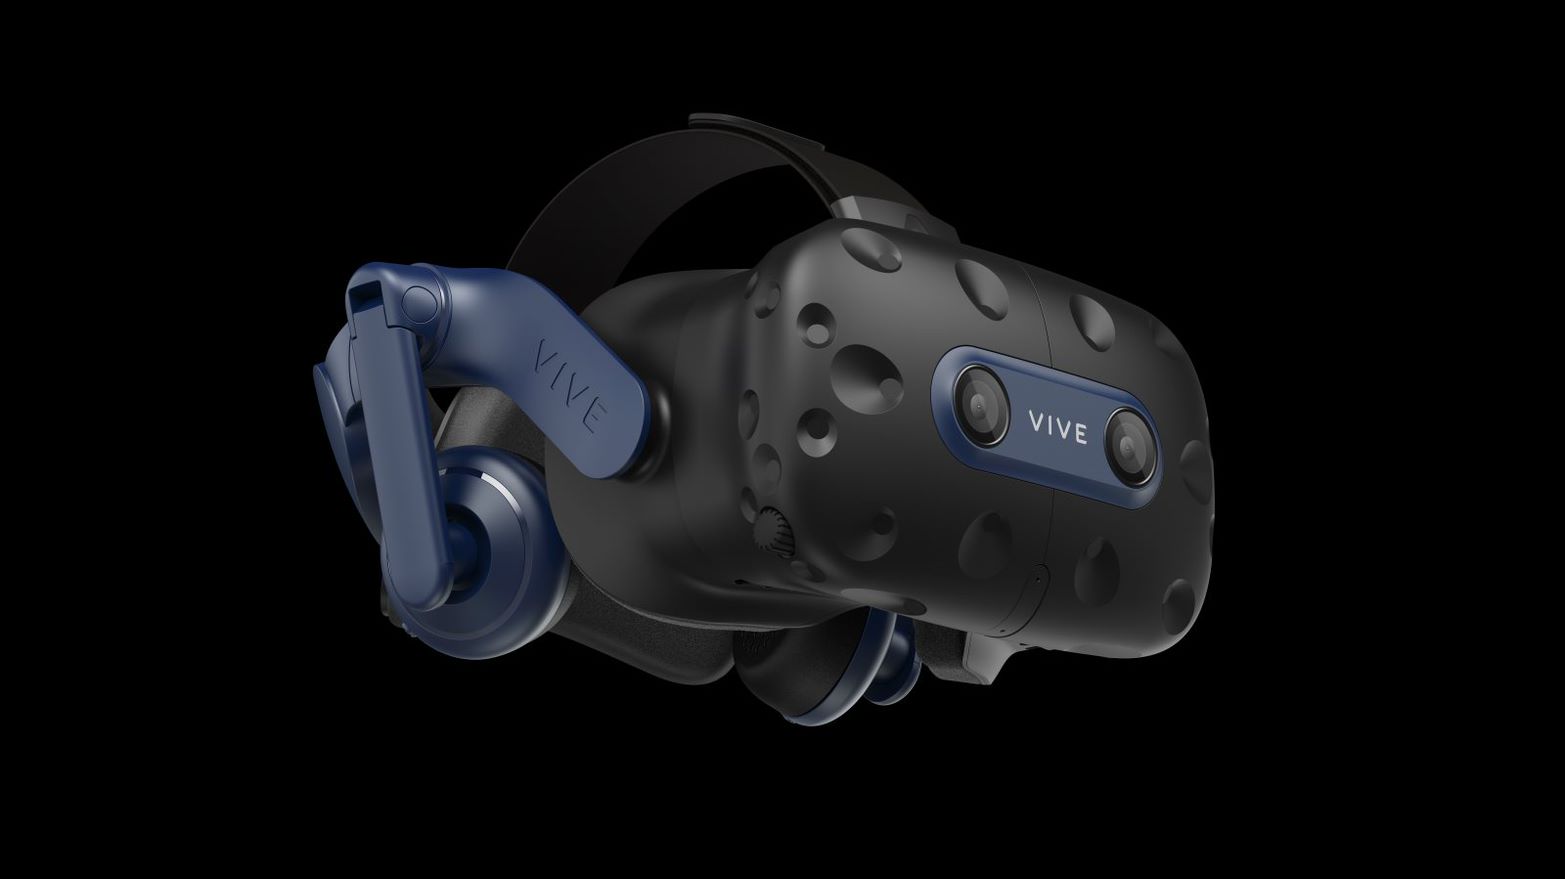 HTC VIVE launches two VR headsets and a dedicated suite of professional VR tools